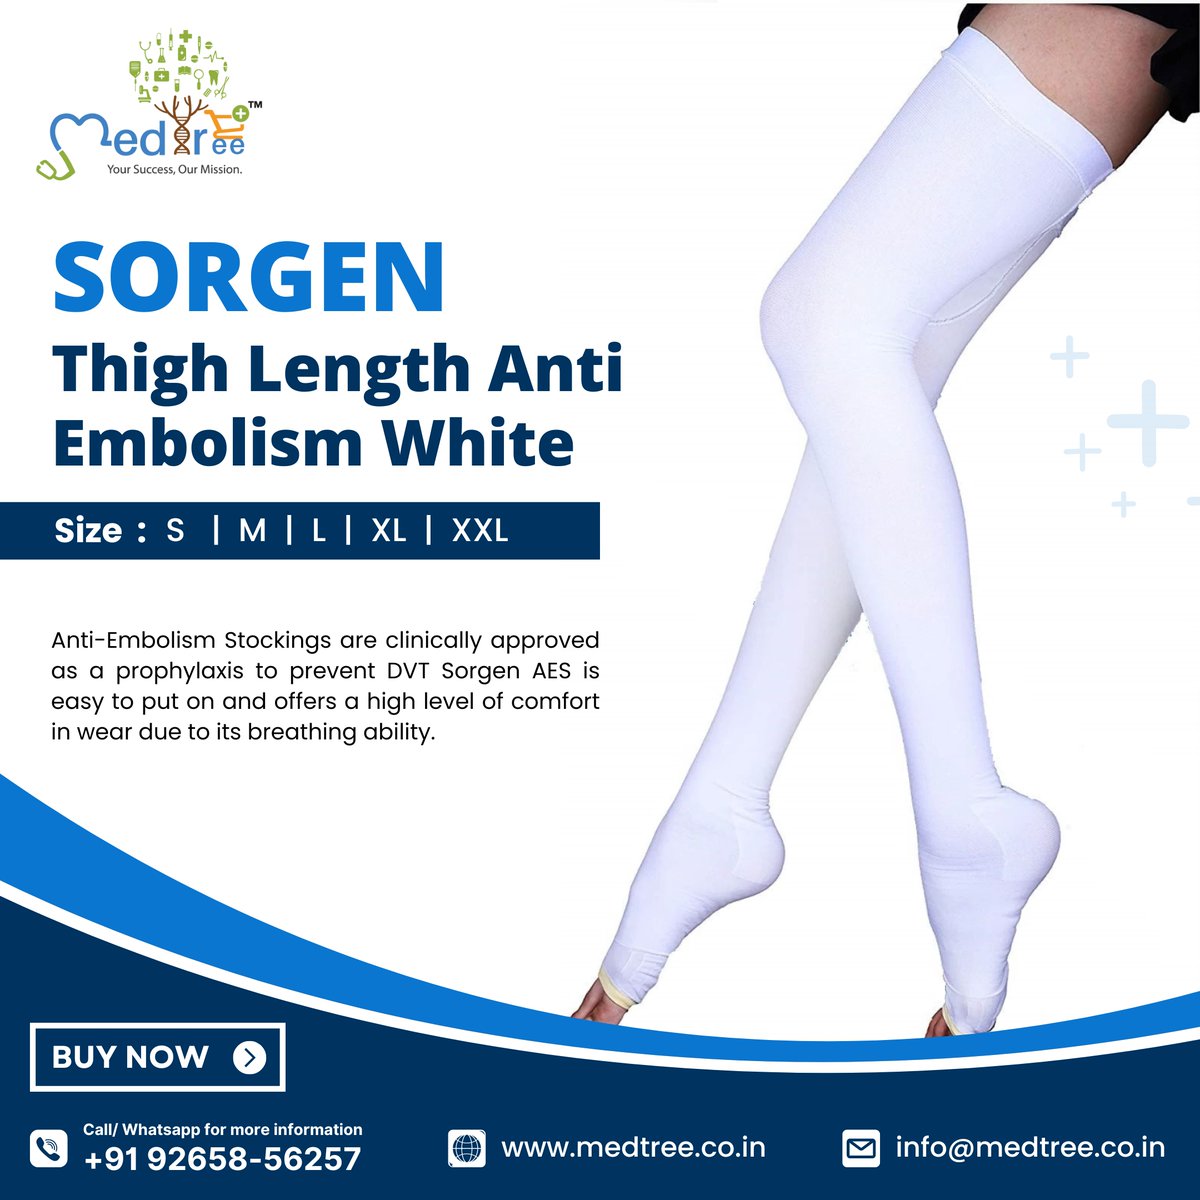 Sorgen Thigh Length Anti Embolism White
Buy Now: medtree.co.in/product/sorgen…

#stockings #thighlength #compressionstockings #medicalstockings #compression #compressionsocks #healthcare #HealthcareProducts #sorgen #OrthopedicCare #orthopedics #orthopaedics #MedTree #medtreeindia